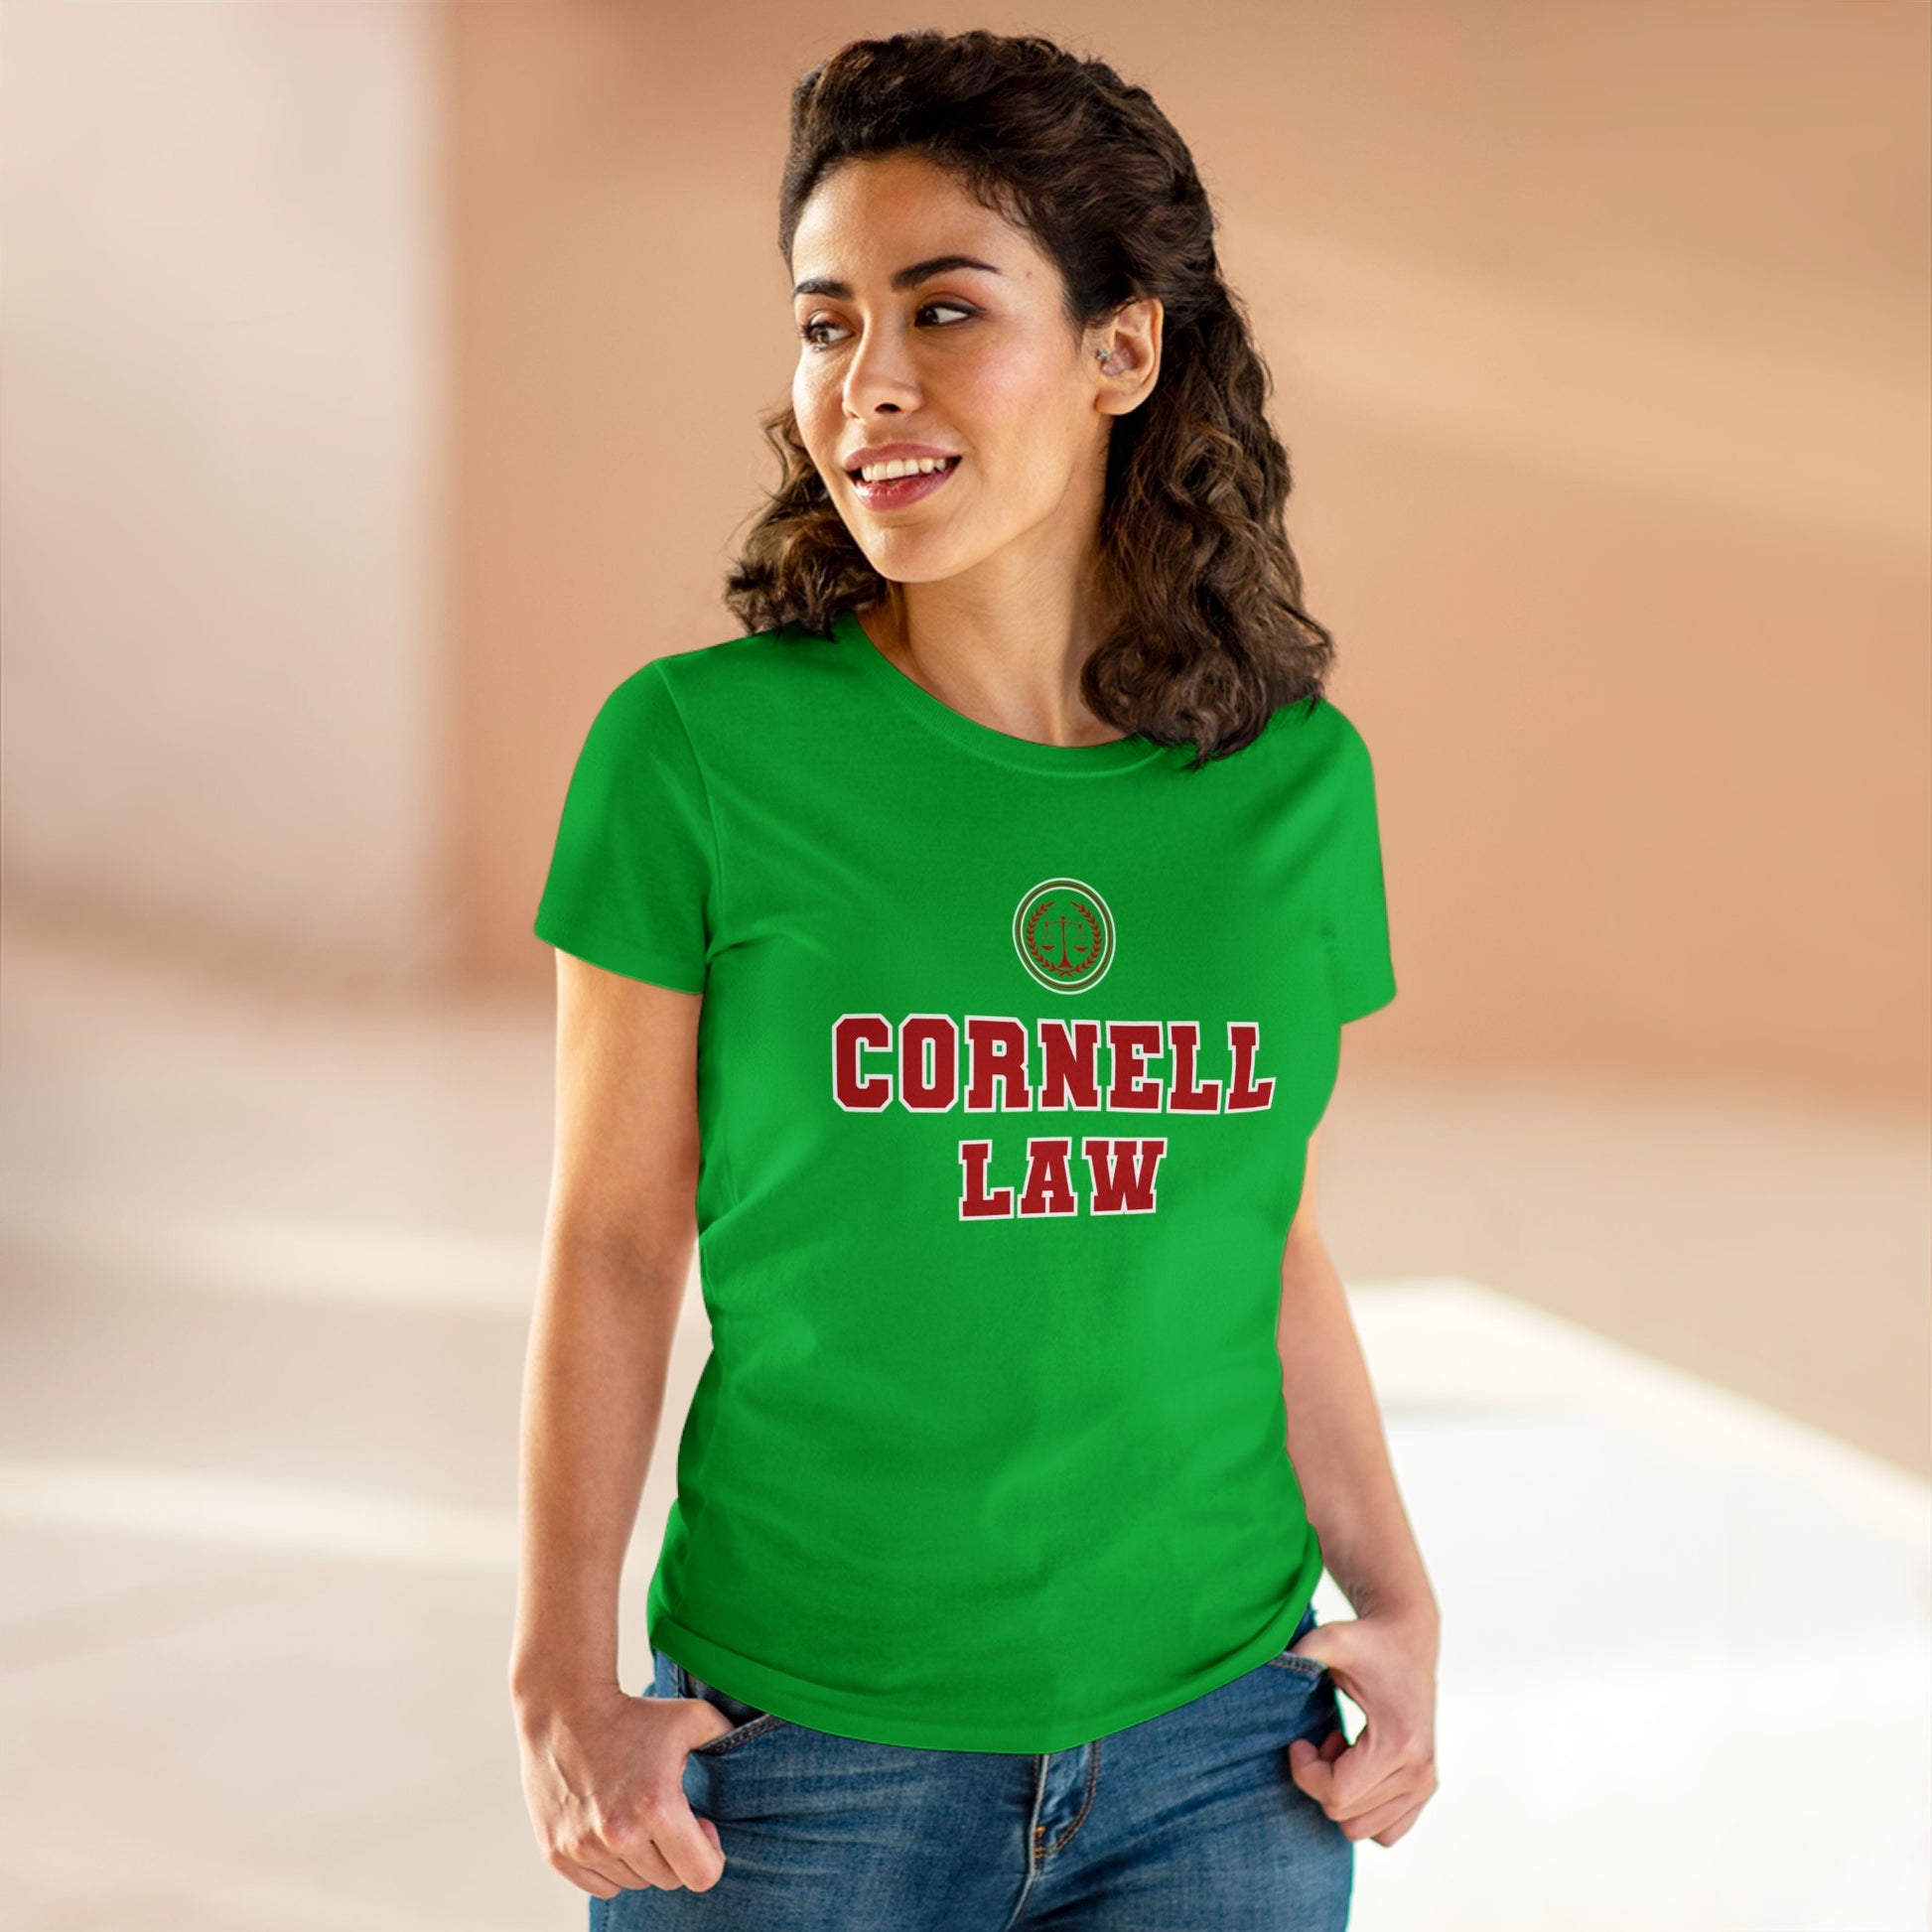 Cornell Law T-shirt With Law School Scales of Justice Emblem in Red